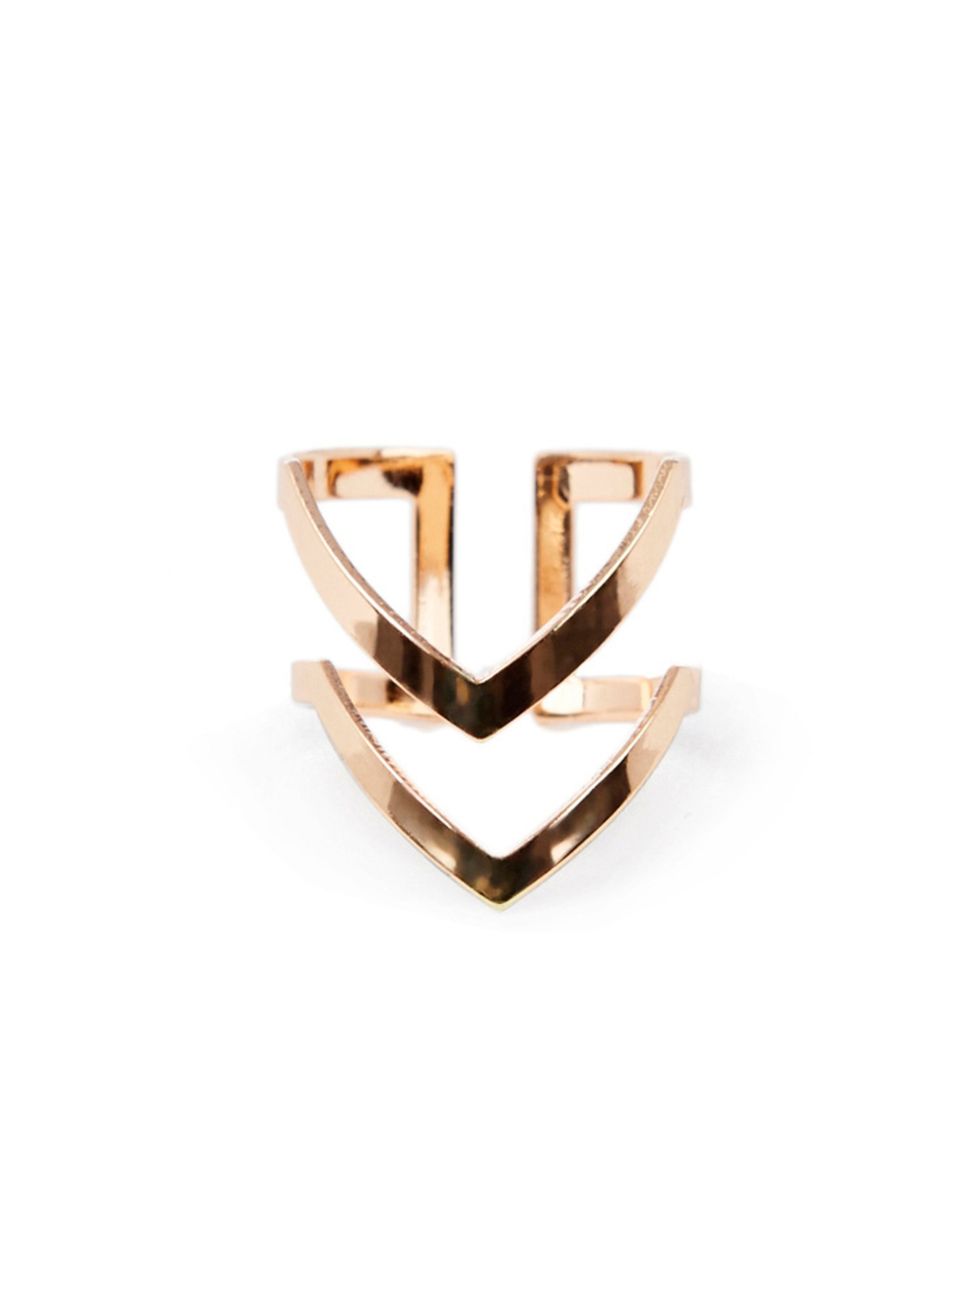 <p>The best things come in small packages.</p>

<p><a href="http://www.warehouse.co.uk///warehouse/fcp-product/02248090" target="_blank">Chevron ring</a>, £8, from Warehouse<br />
 </p>